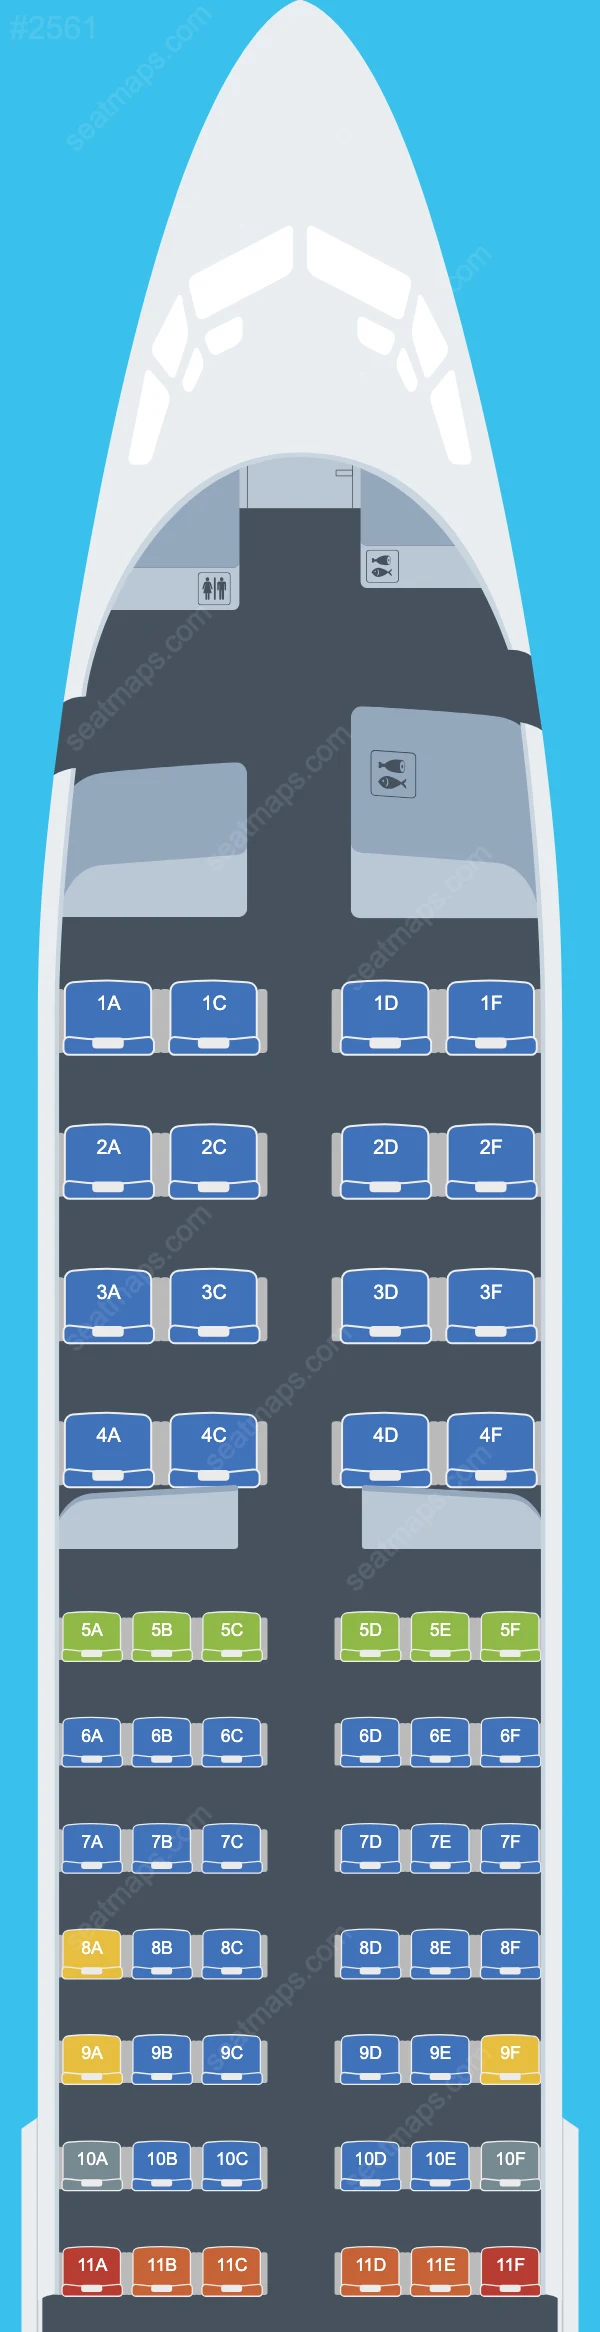 Malaysia Airlines Boeing 737 Seat Maps 737-800 V.1